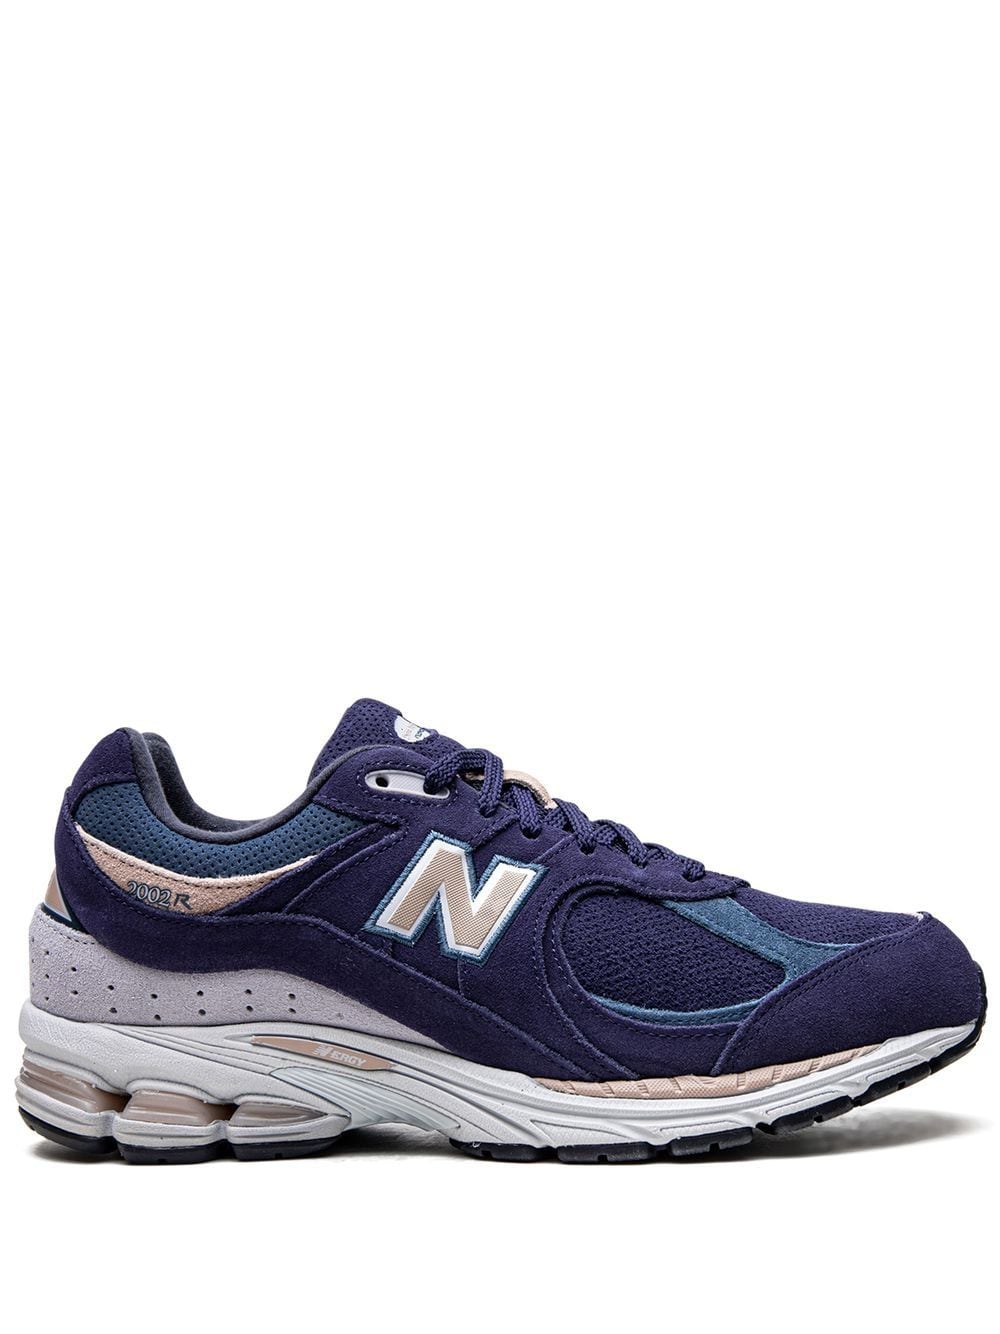 New Balance 2002R low-top sneakers "Night Tide" - Blue